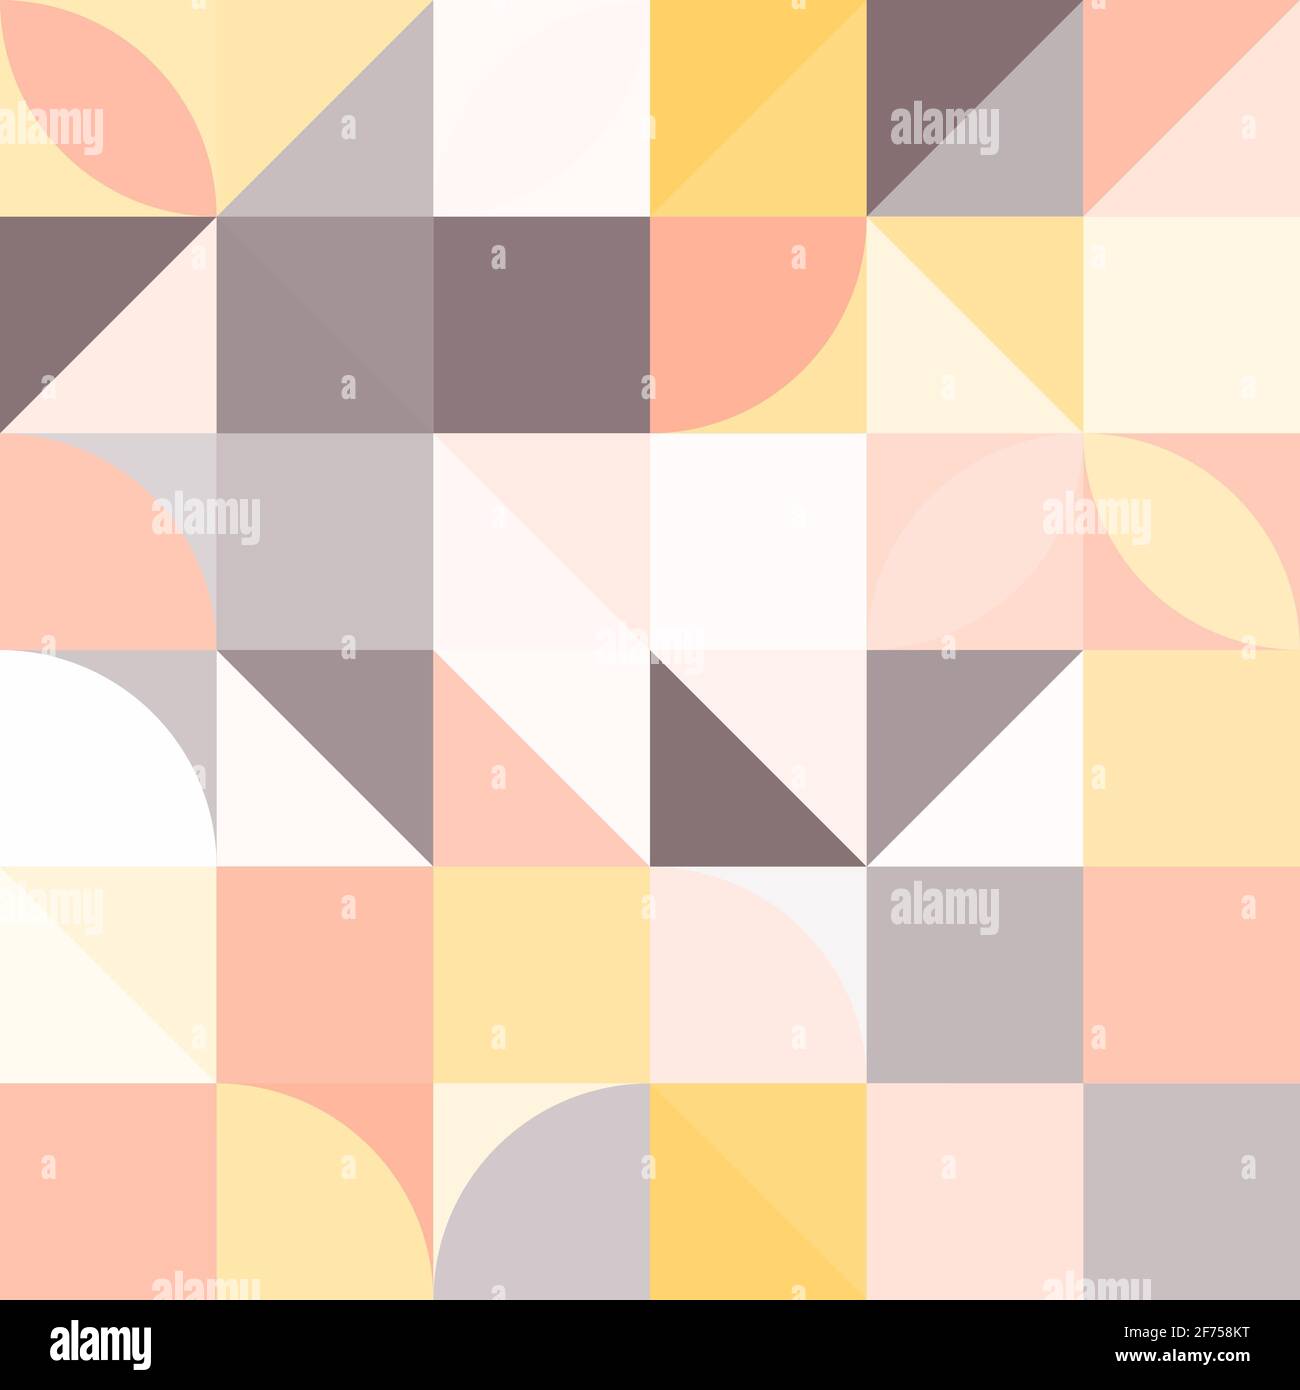 Simple clean abstract bauhaus pattern Stock Photo